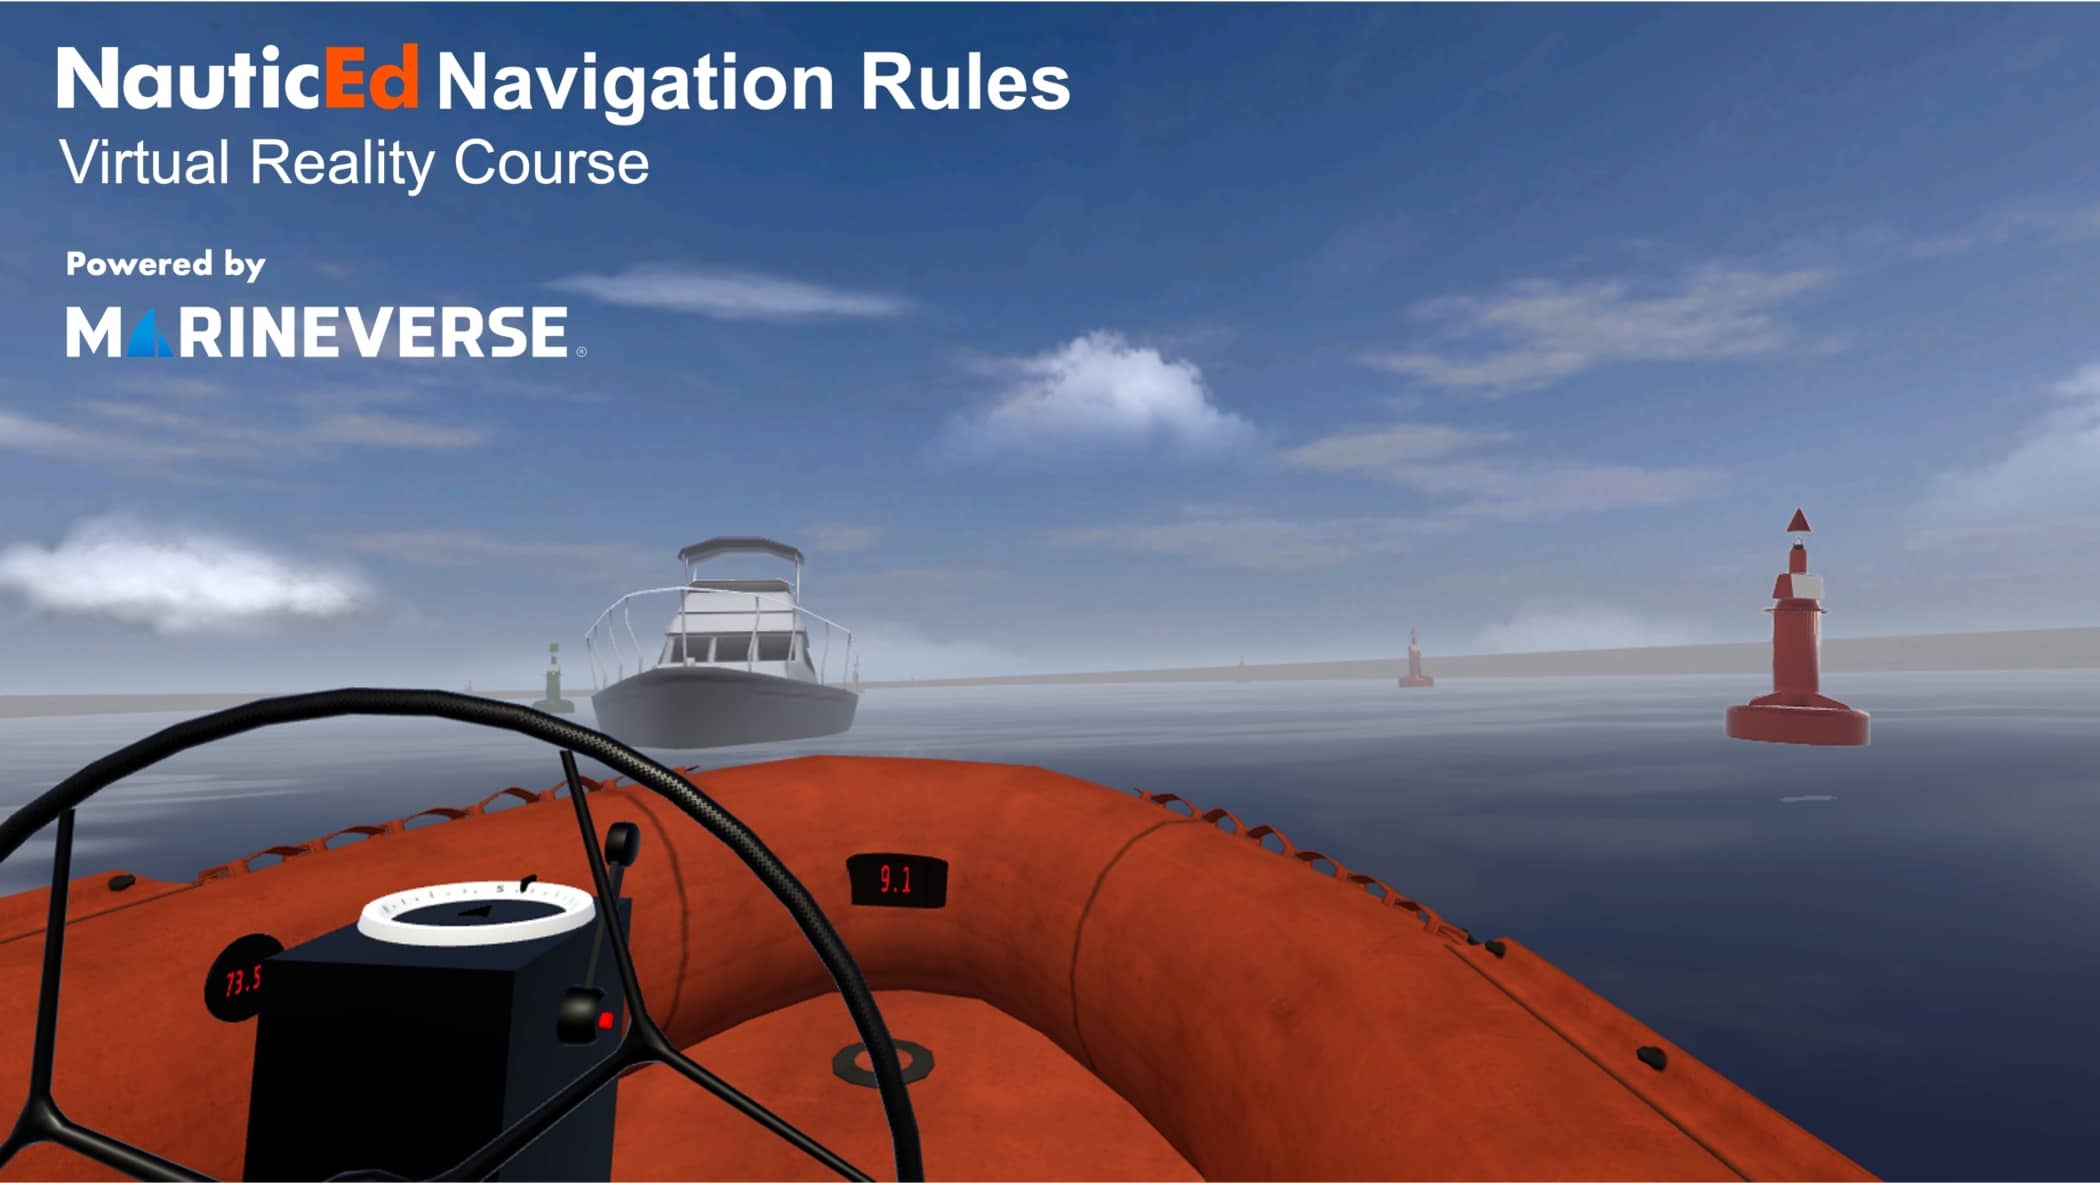 Participants are transported onto a virtual but highly realistic boat where they steer through a navigation obstacle course.